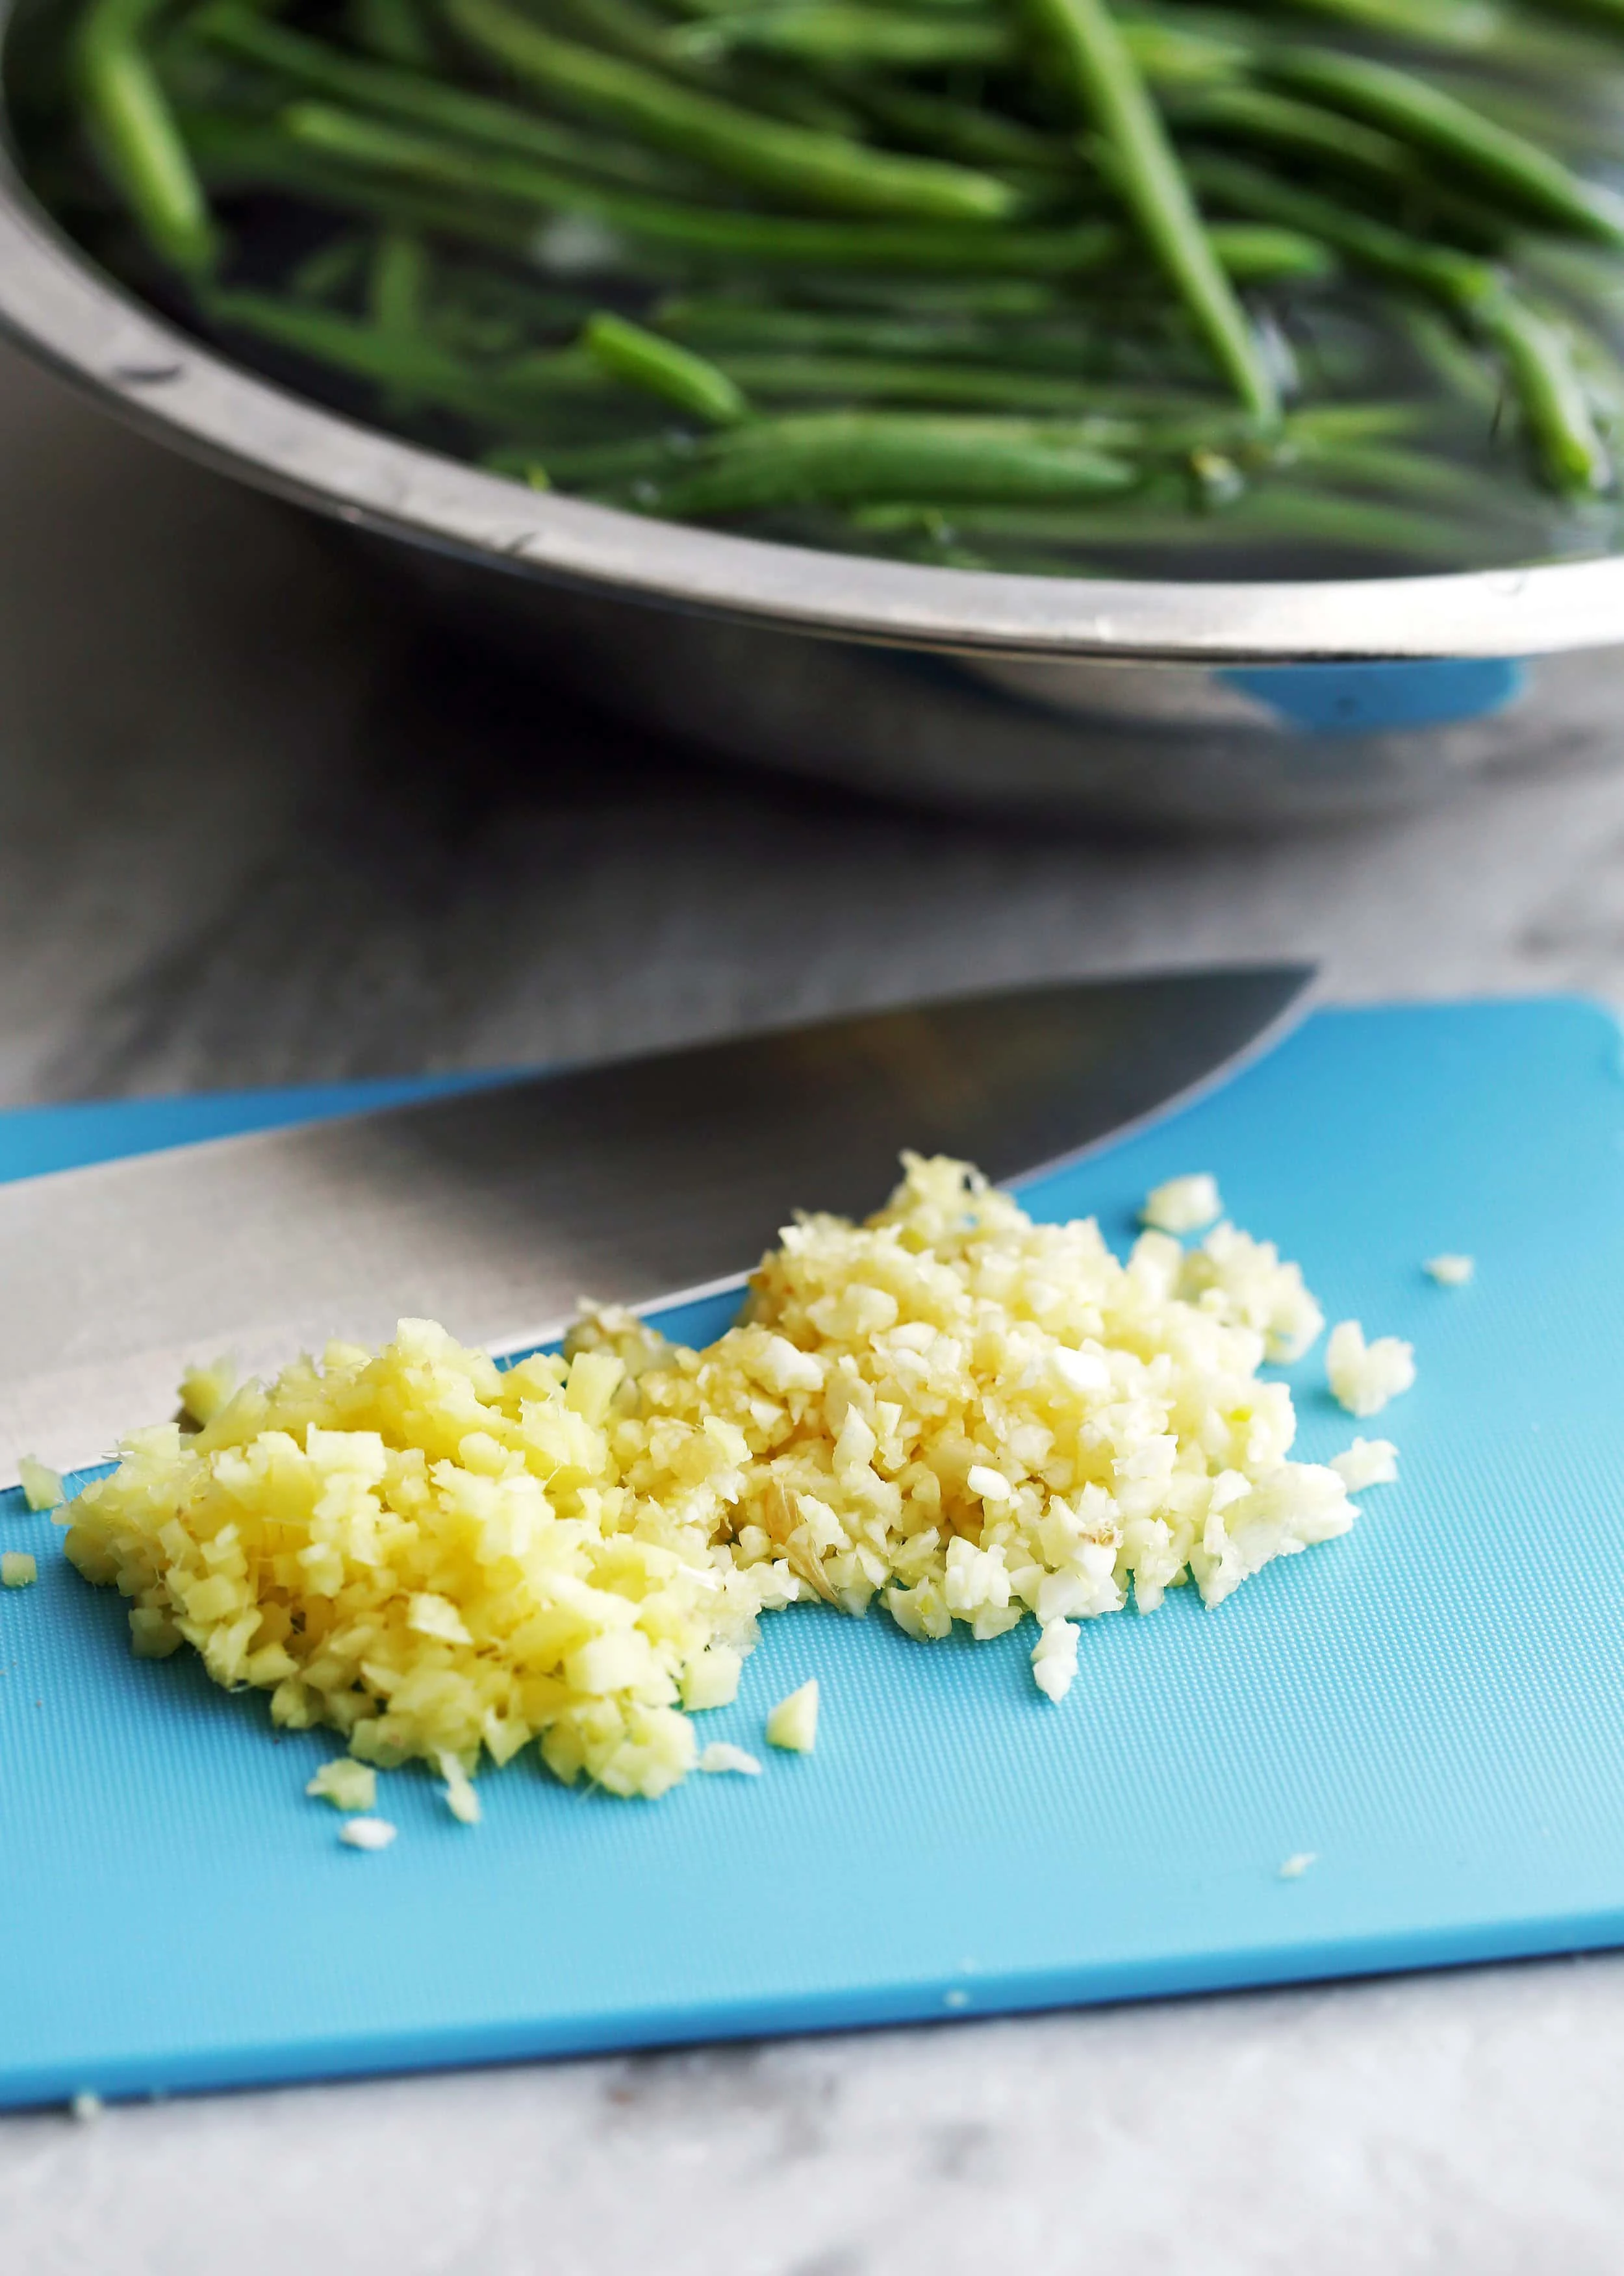 Minced garlic and ginger on a blue cutting board with a knife.